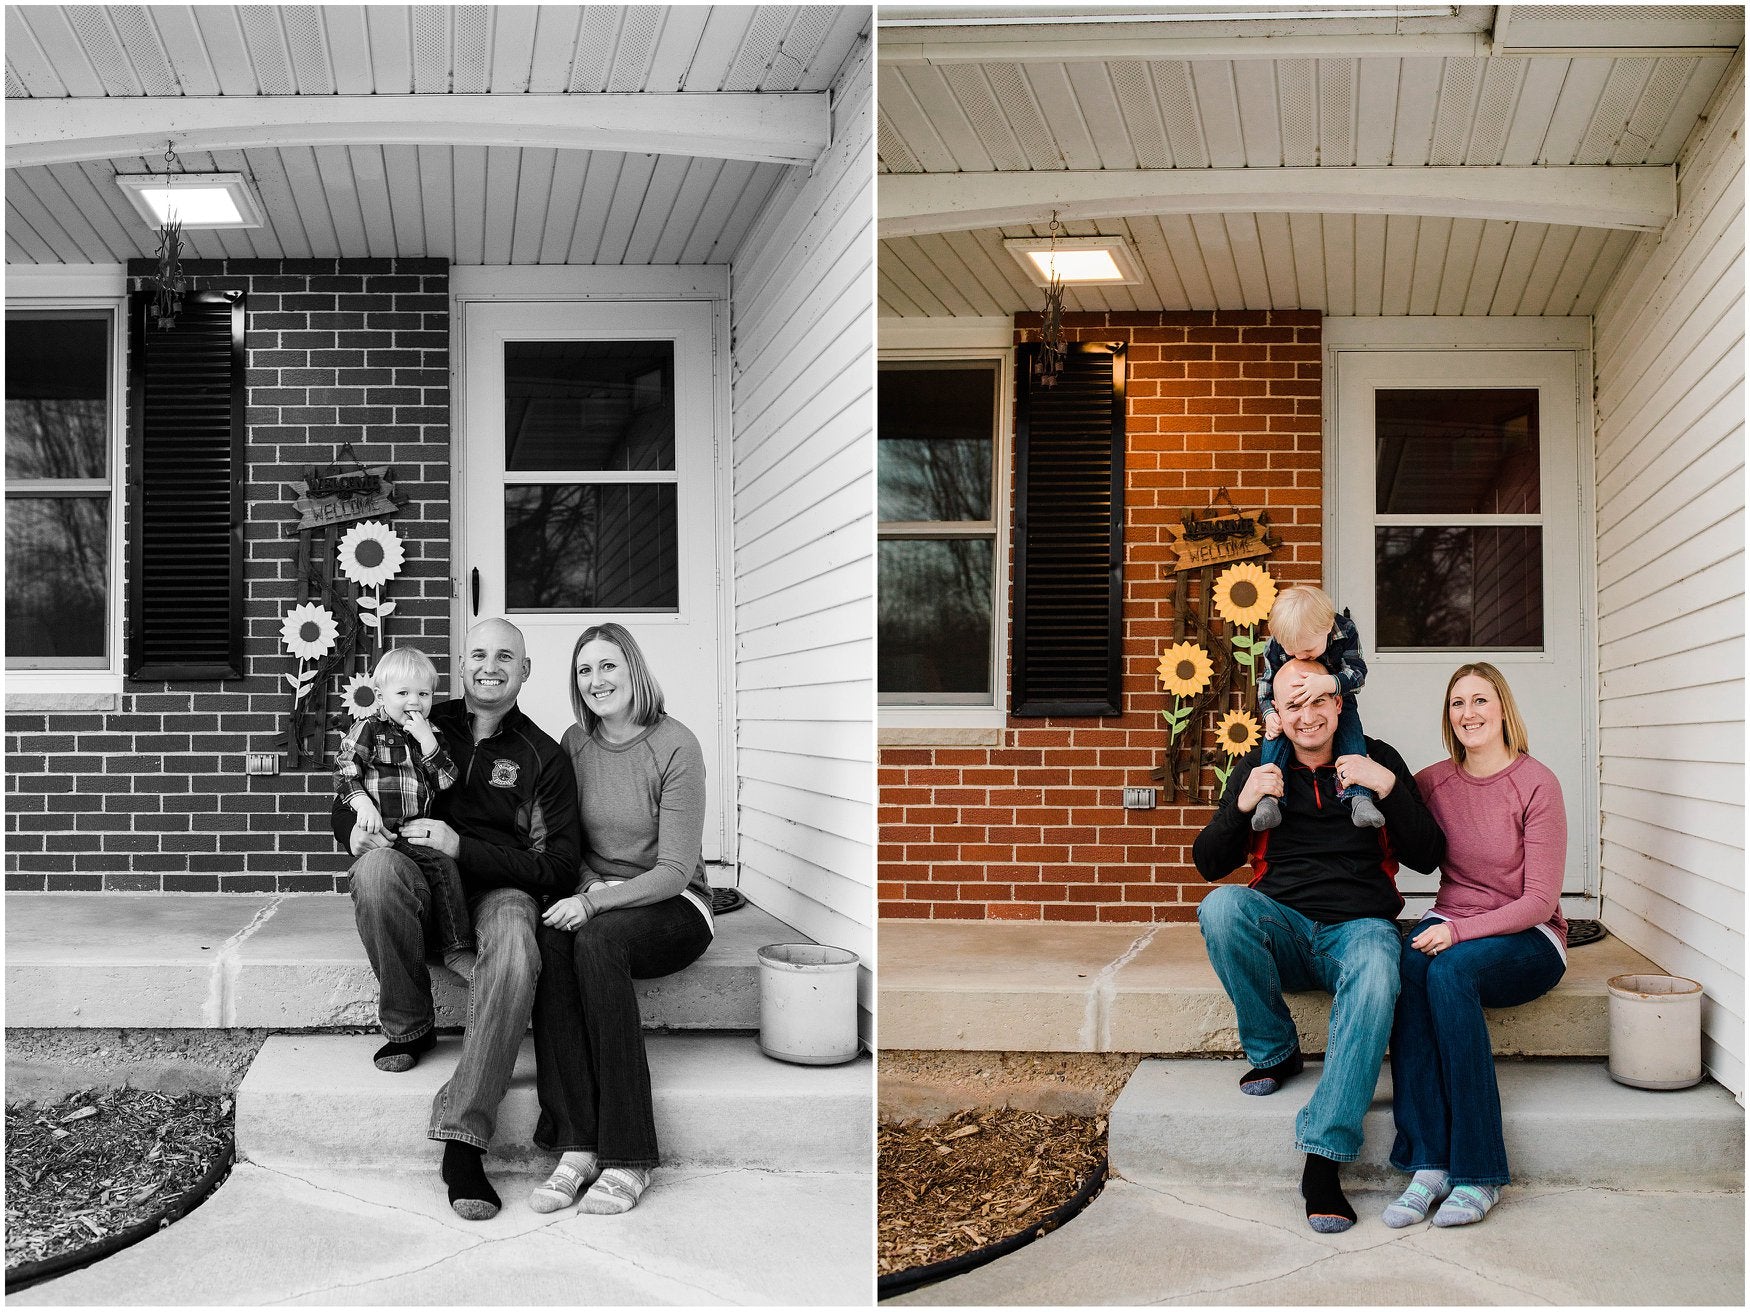 Front Porch Photo Sessions: How photographers and families are adapting to social distancing with the "Front Steps Project"